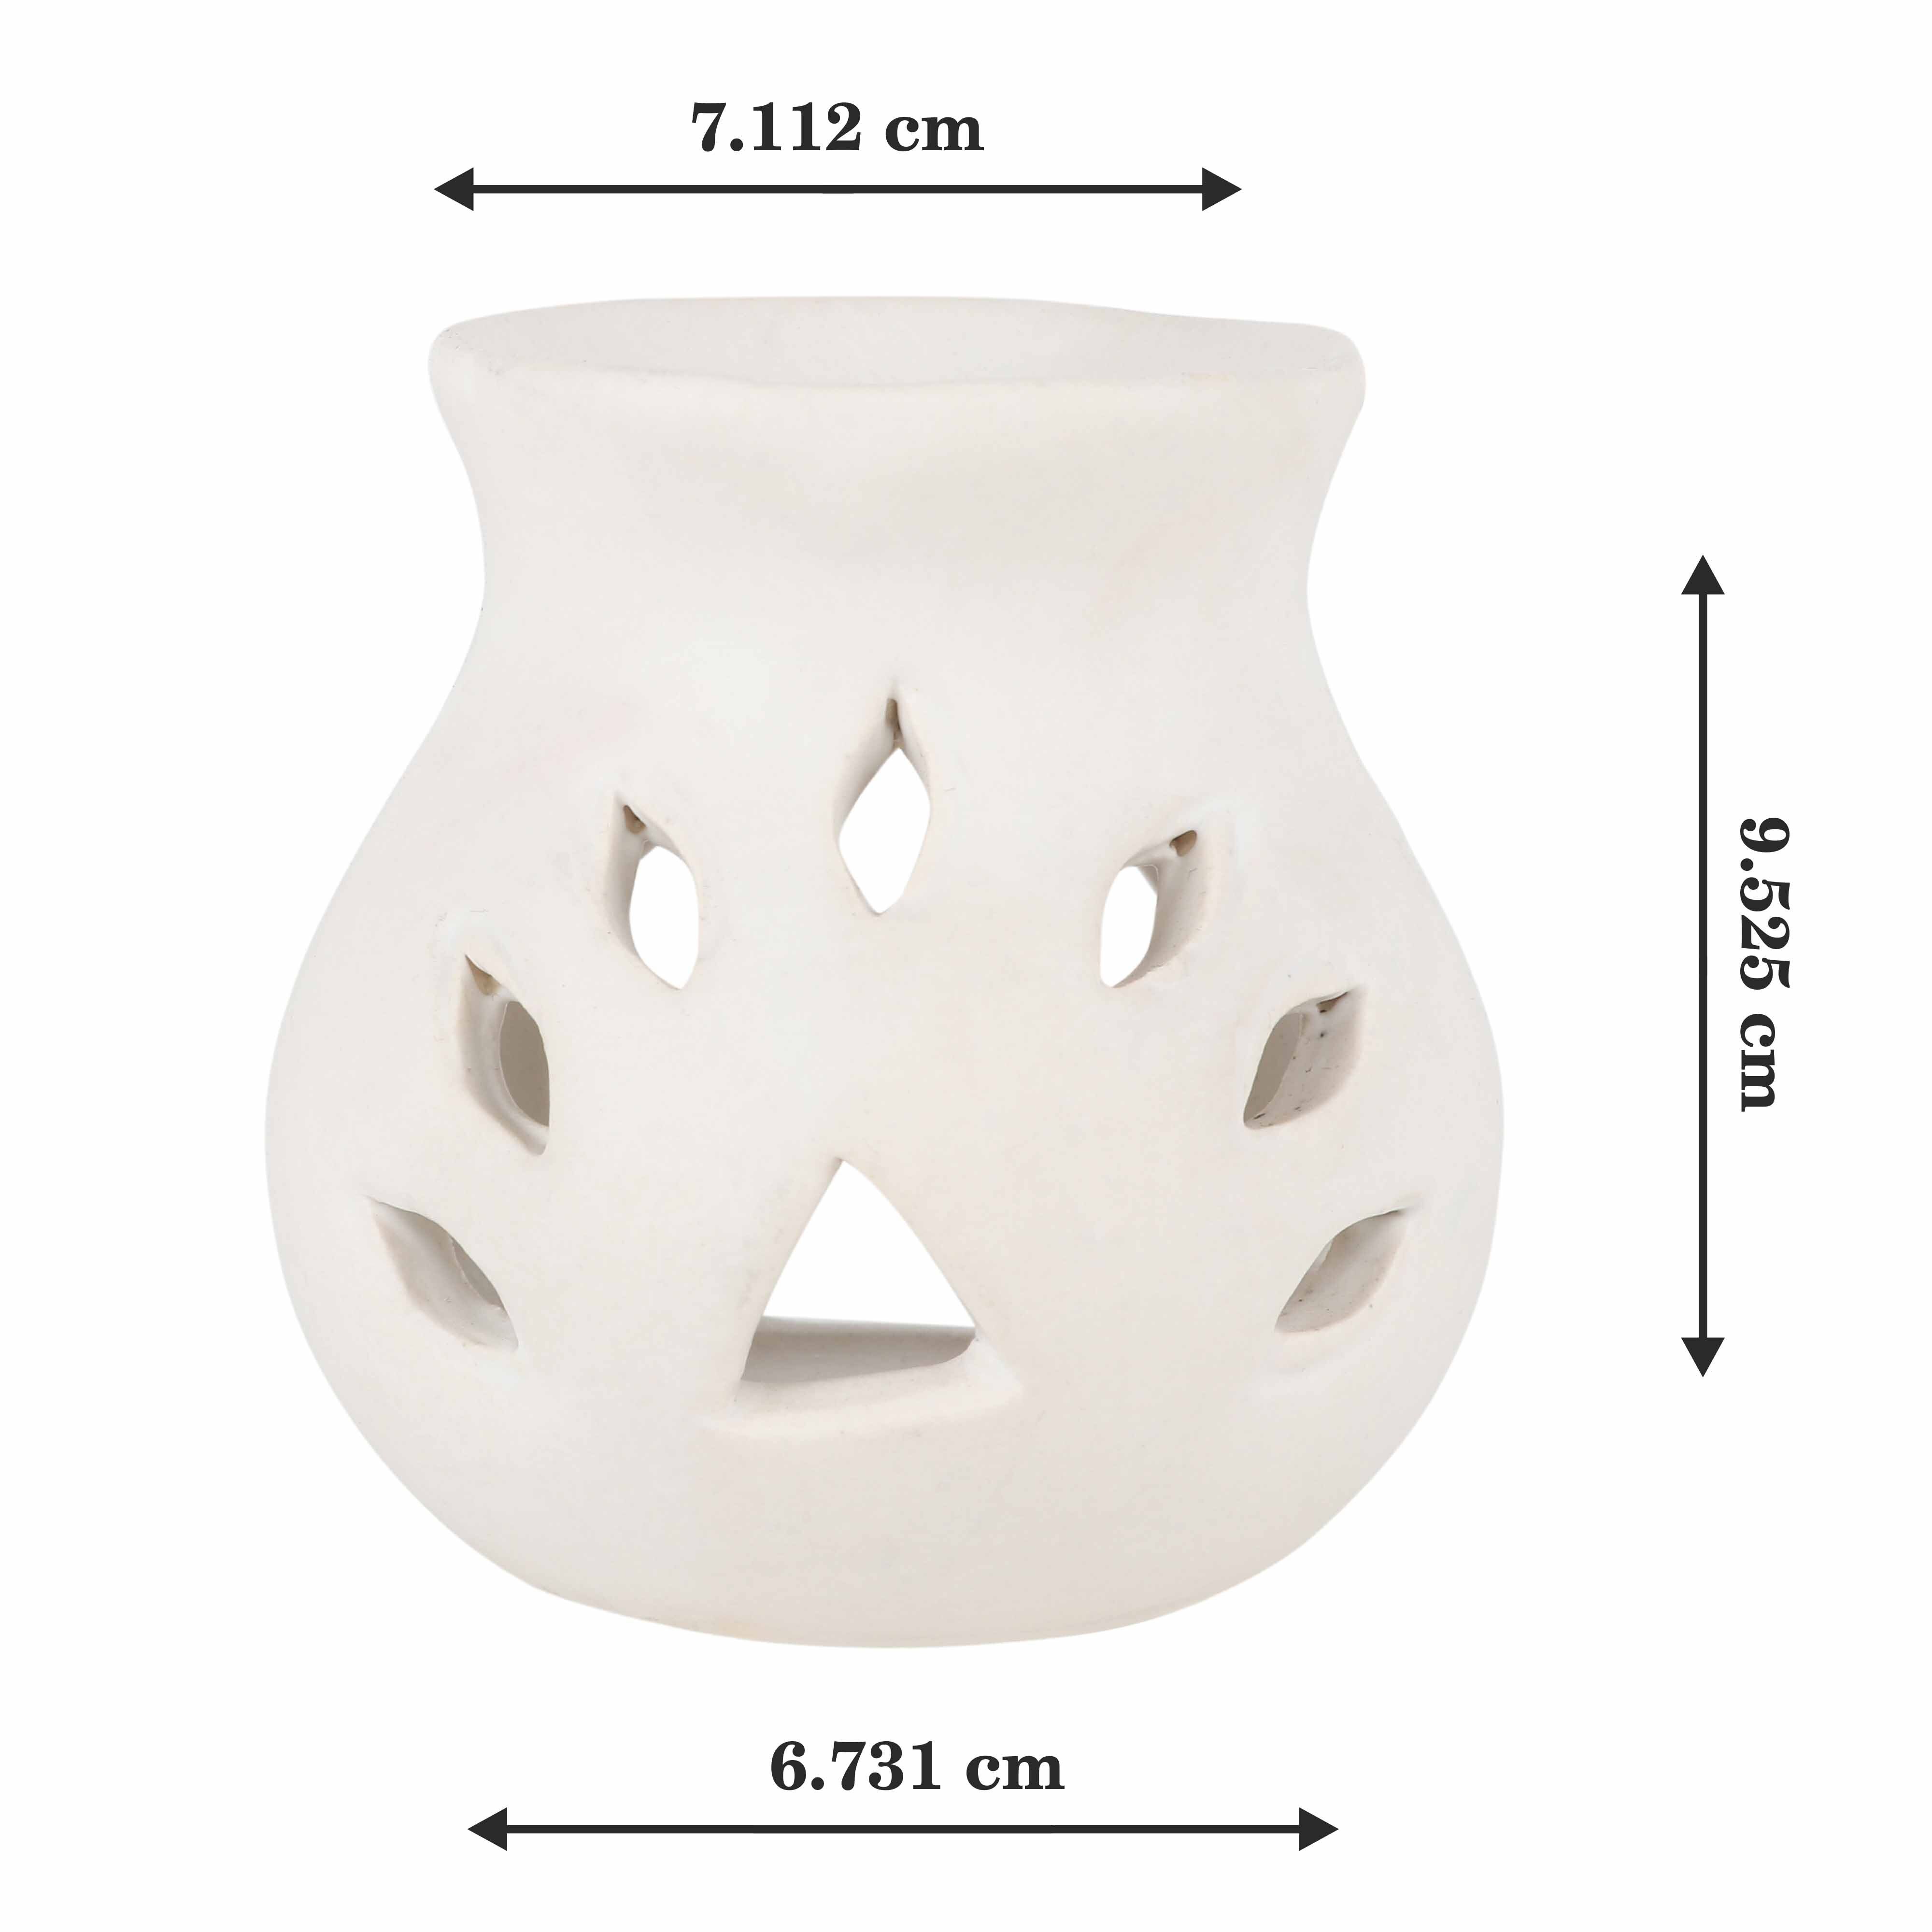 Asian Aura Ceramic Aromatic Oil Diffuser with 2 oil bottles AA-CB-0026W